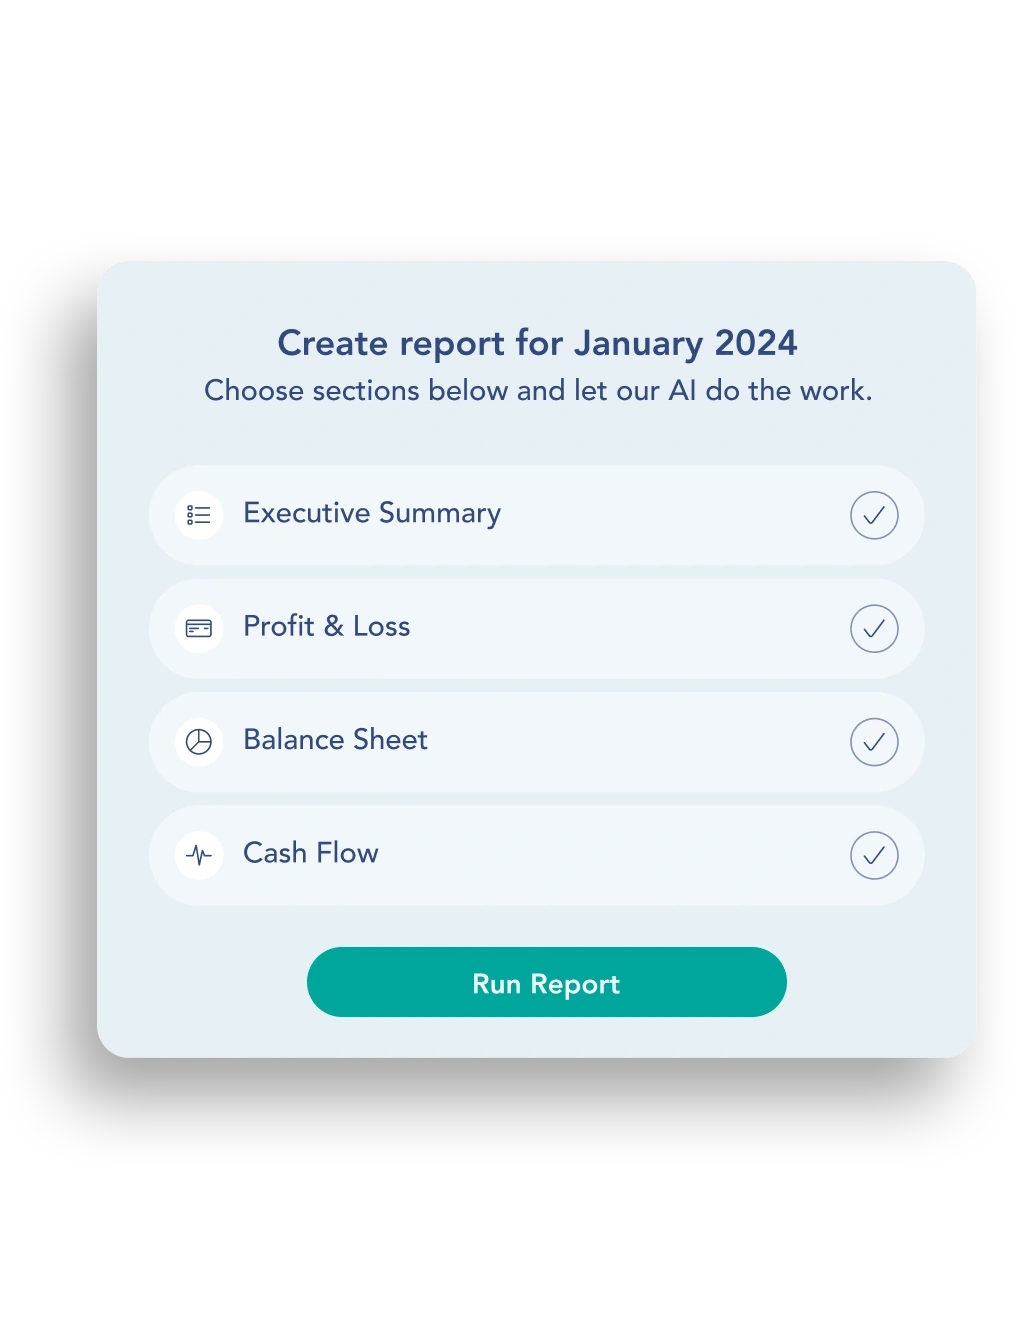 Create report menu with options to generate executive summary, profit & loss, balance sheet, and cash flow.